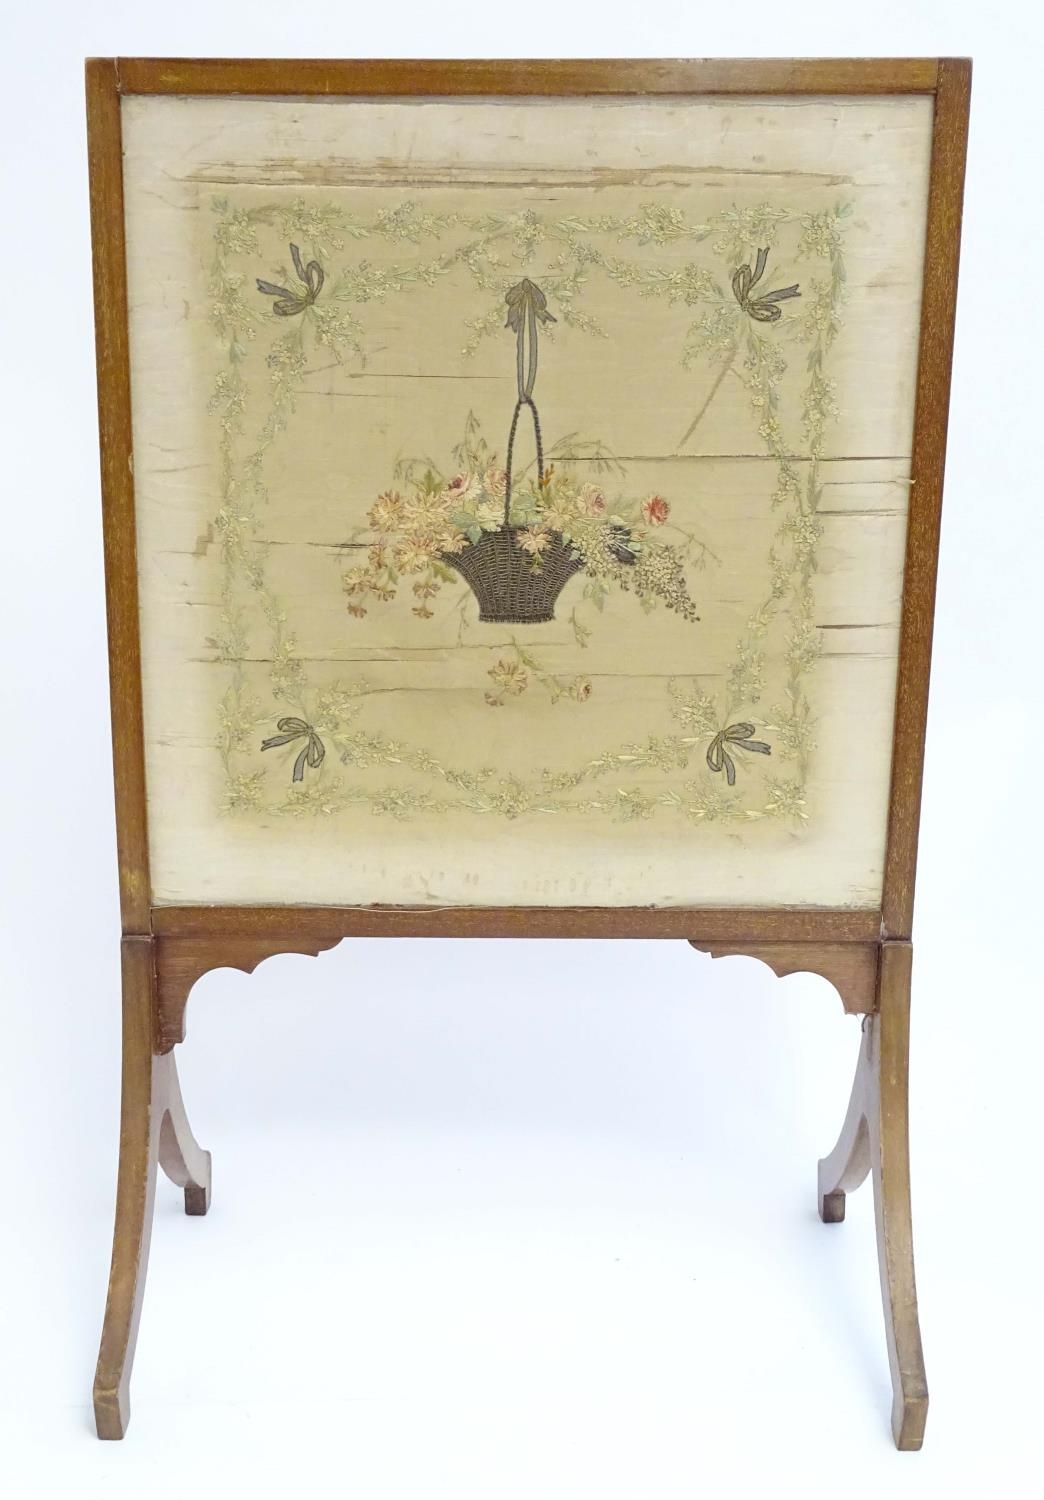 An early 19thC silk needlework with fine floral decoration, bows, swags and a woven basket in a - Image 5 of 10